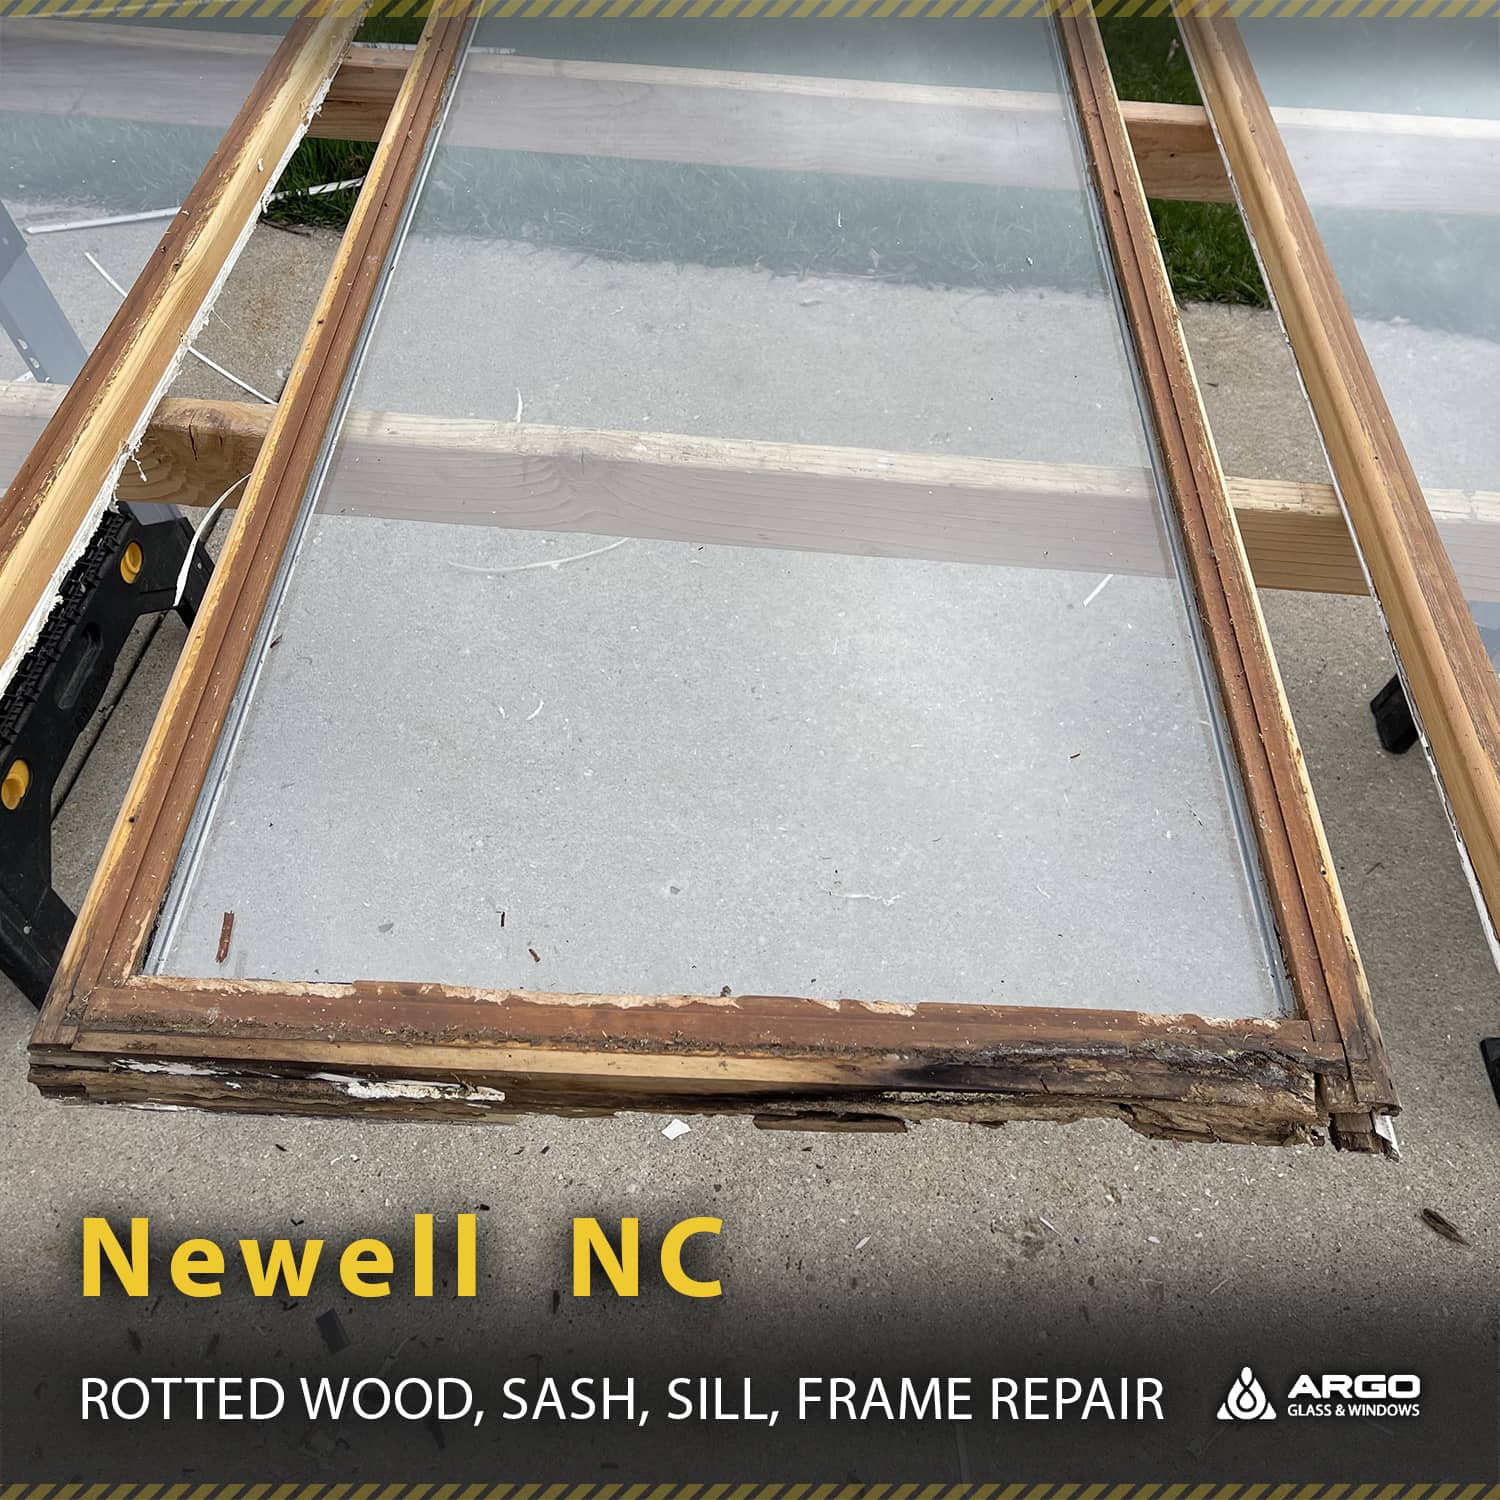 Professional Rotted Wood, Sash, Sill, Frame Repair company